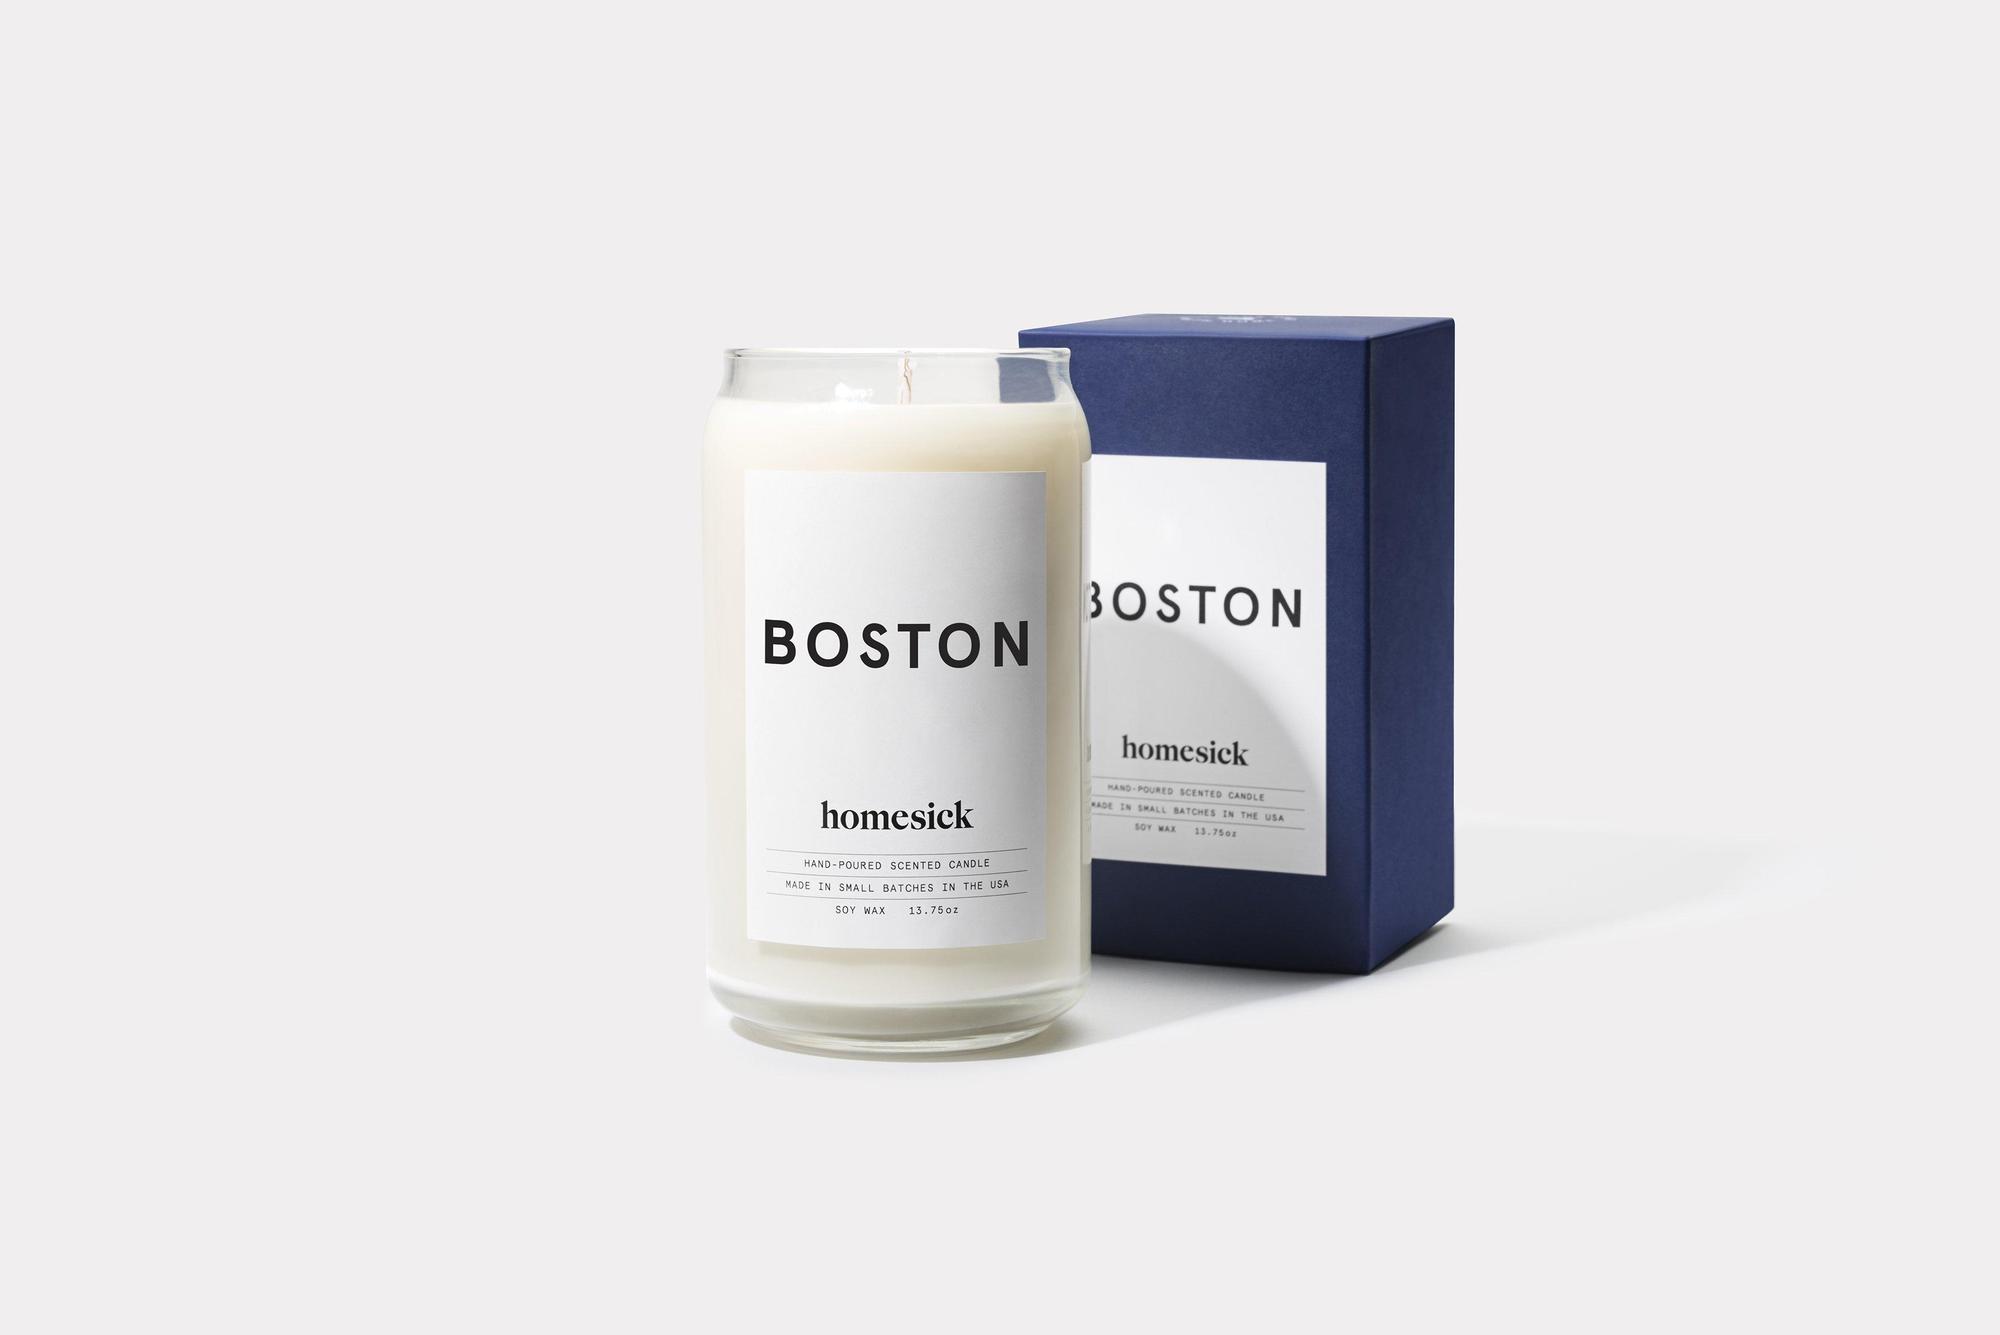 Image a Homesick Boston Candle inside a glass with white wax. A blue box that says 'Boston' on it sits behind it.